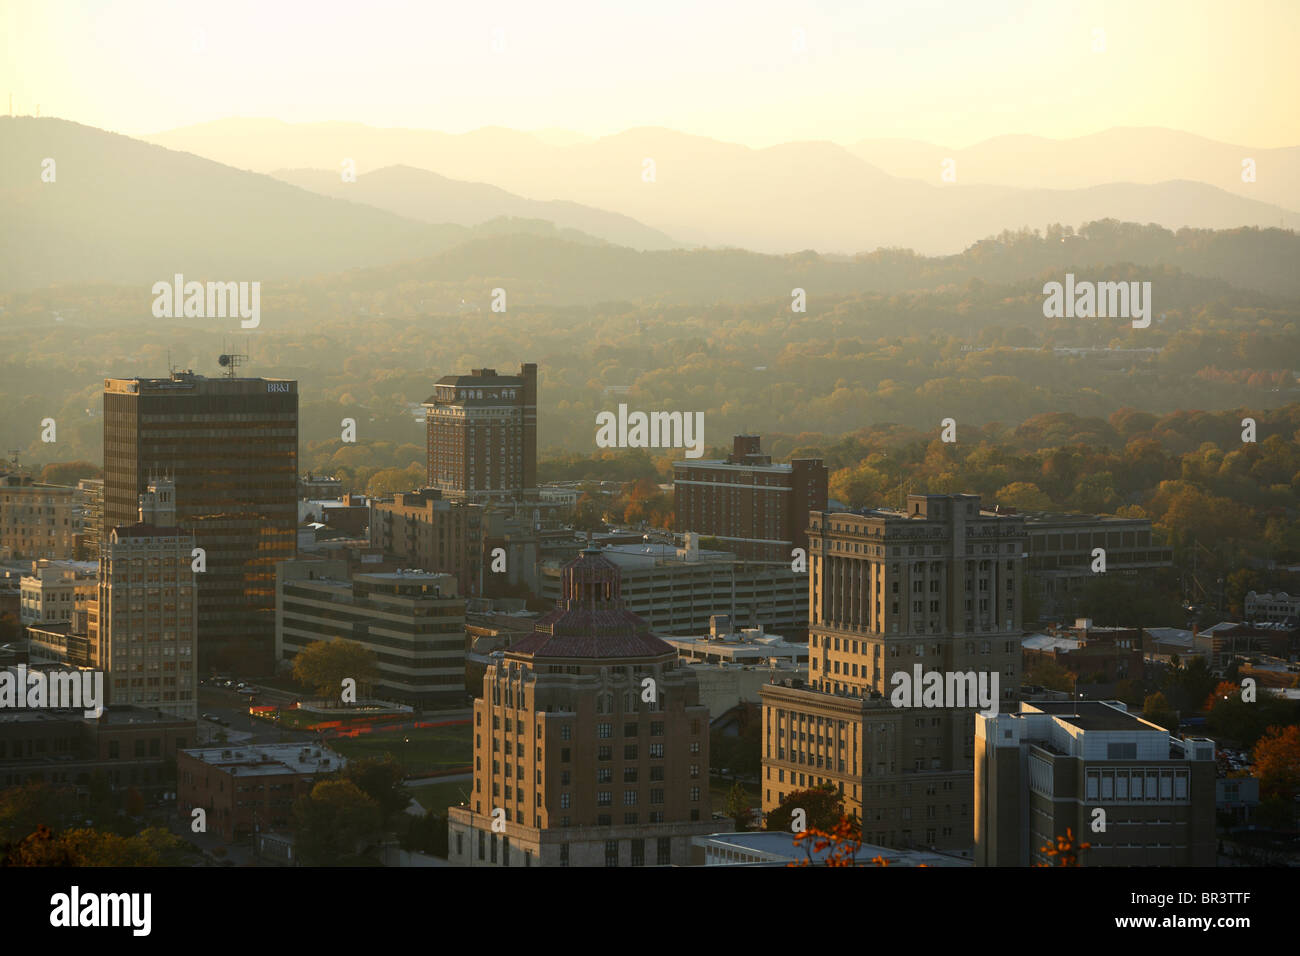 View of the evening sun setting over the blue ridge mountains surrounding downtown Asheville, NC Stock Photo